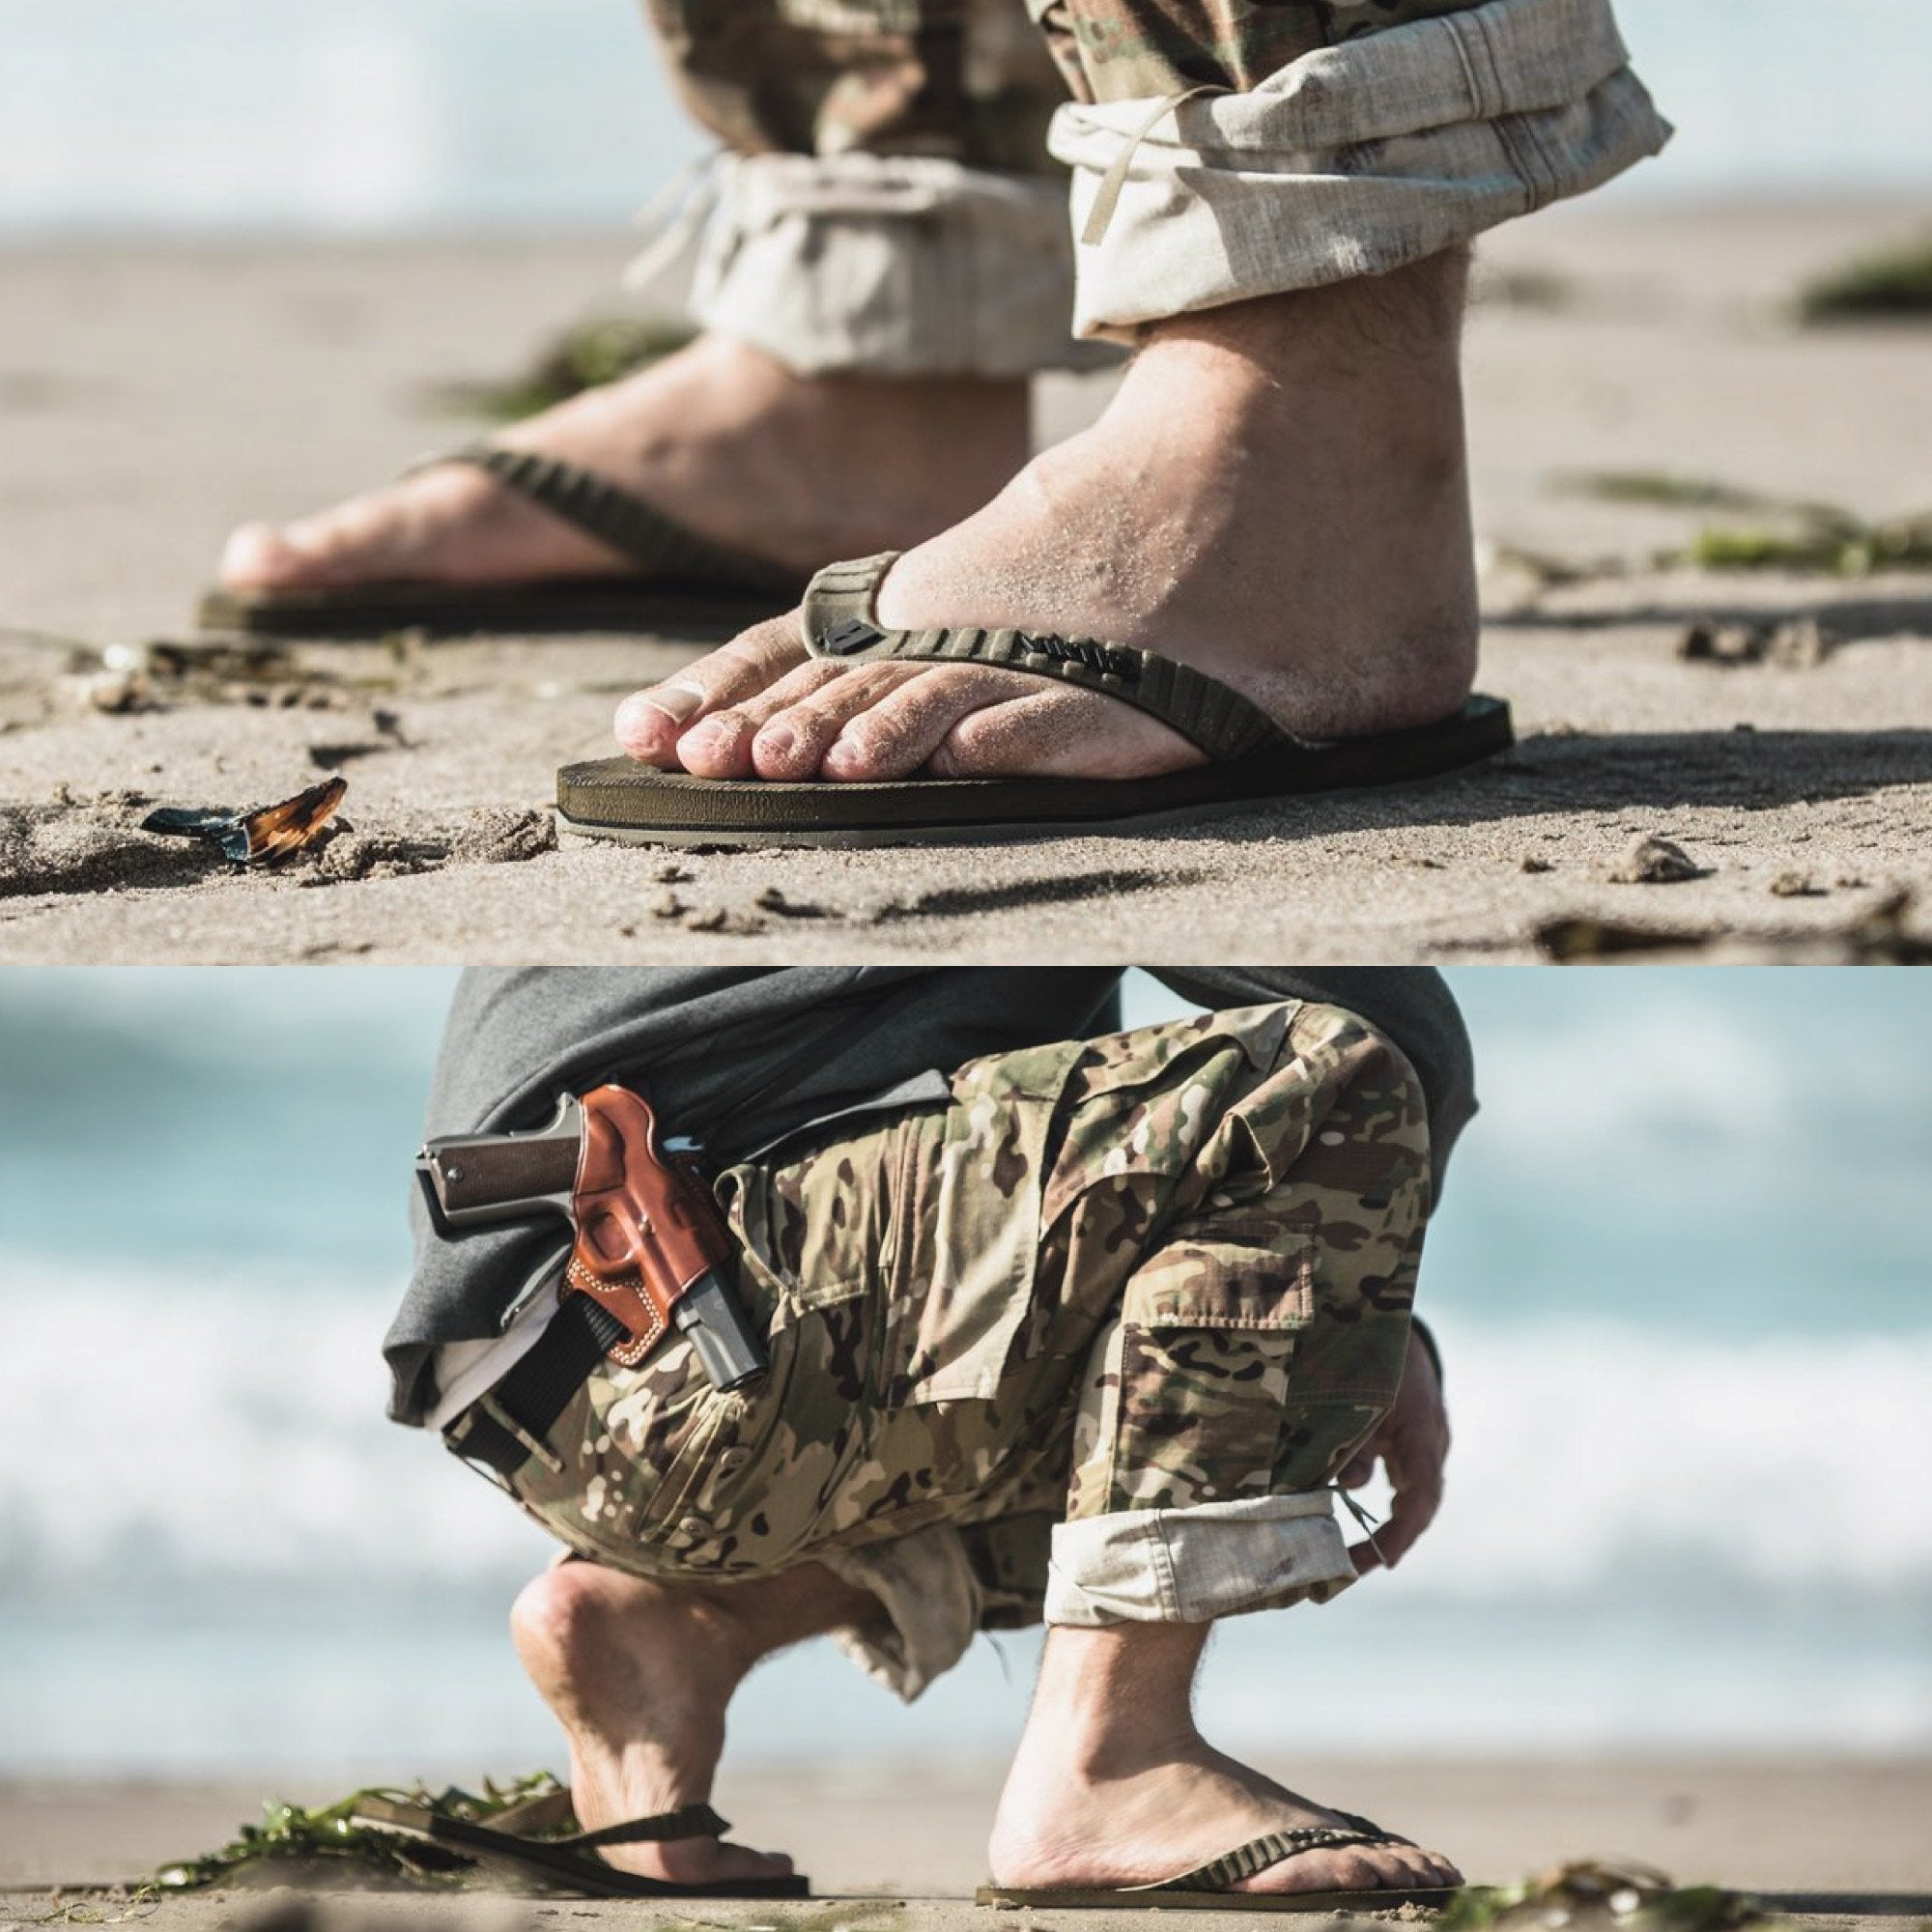 VIKTOS Chuville Shemagh Sandals Coyote Footwear VIKTOS Tactical Gear Supplier Tactical Distributors Australia